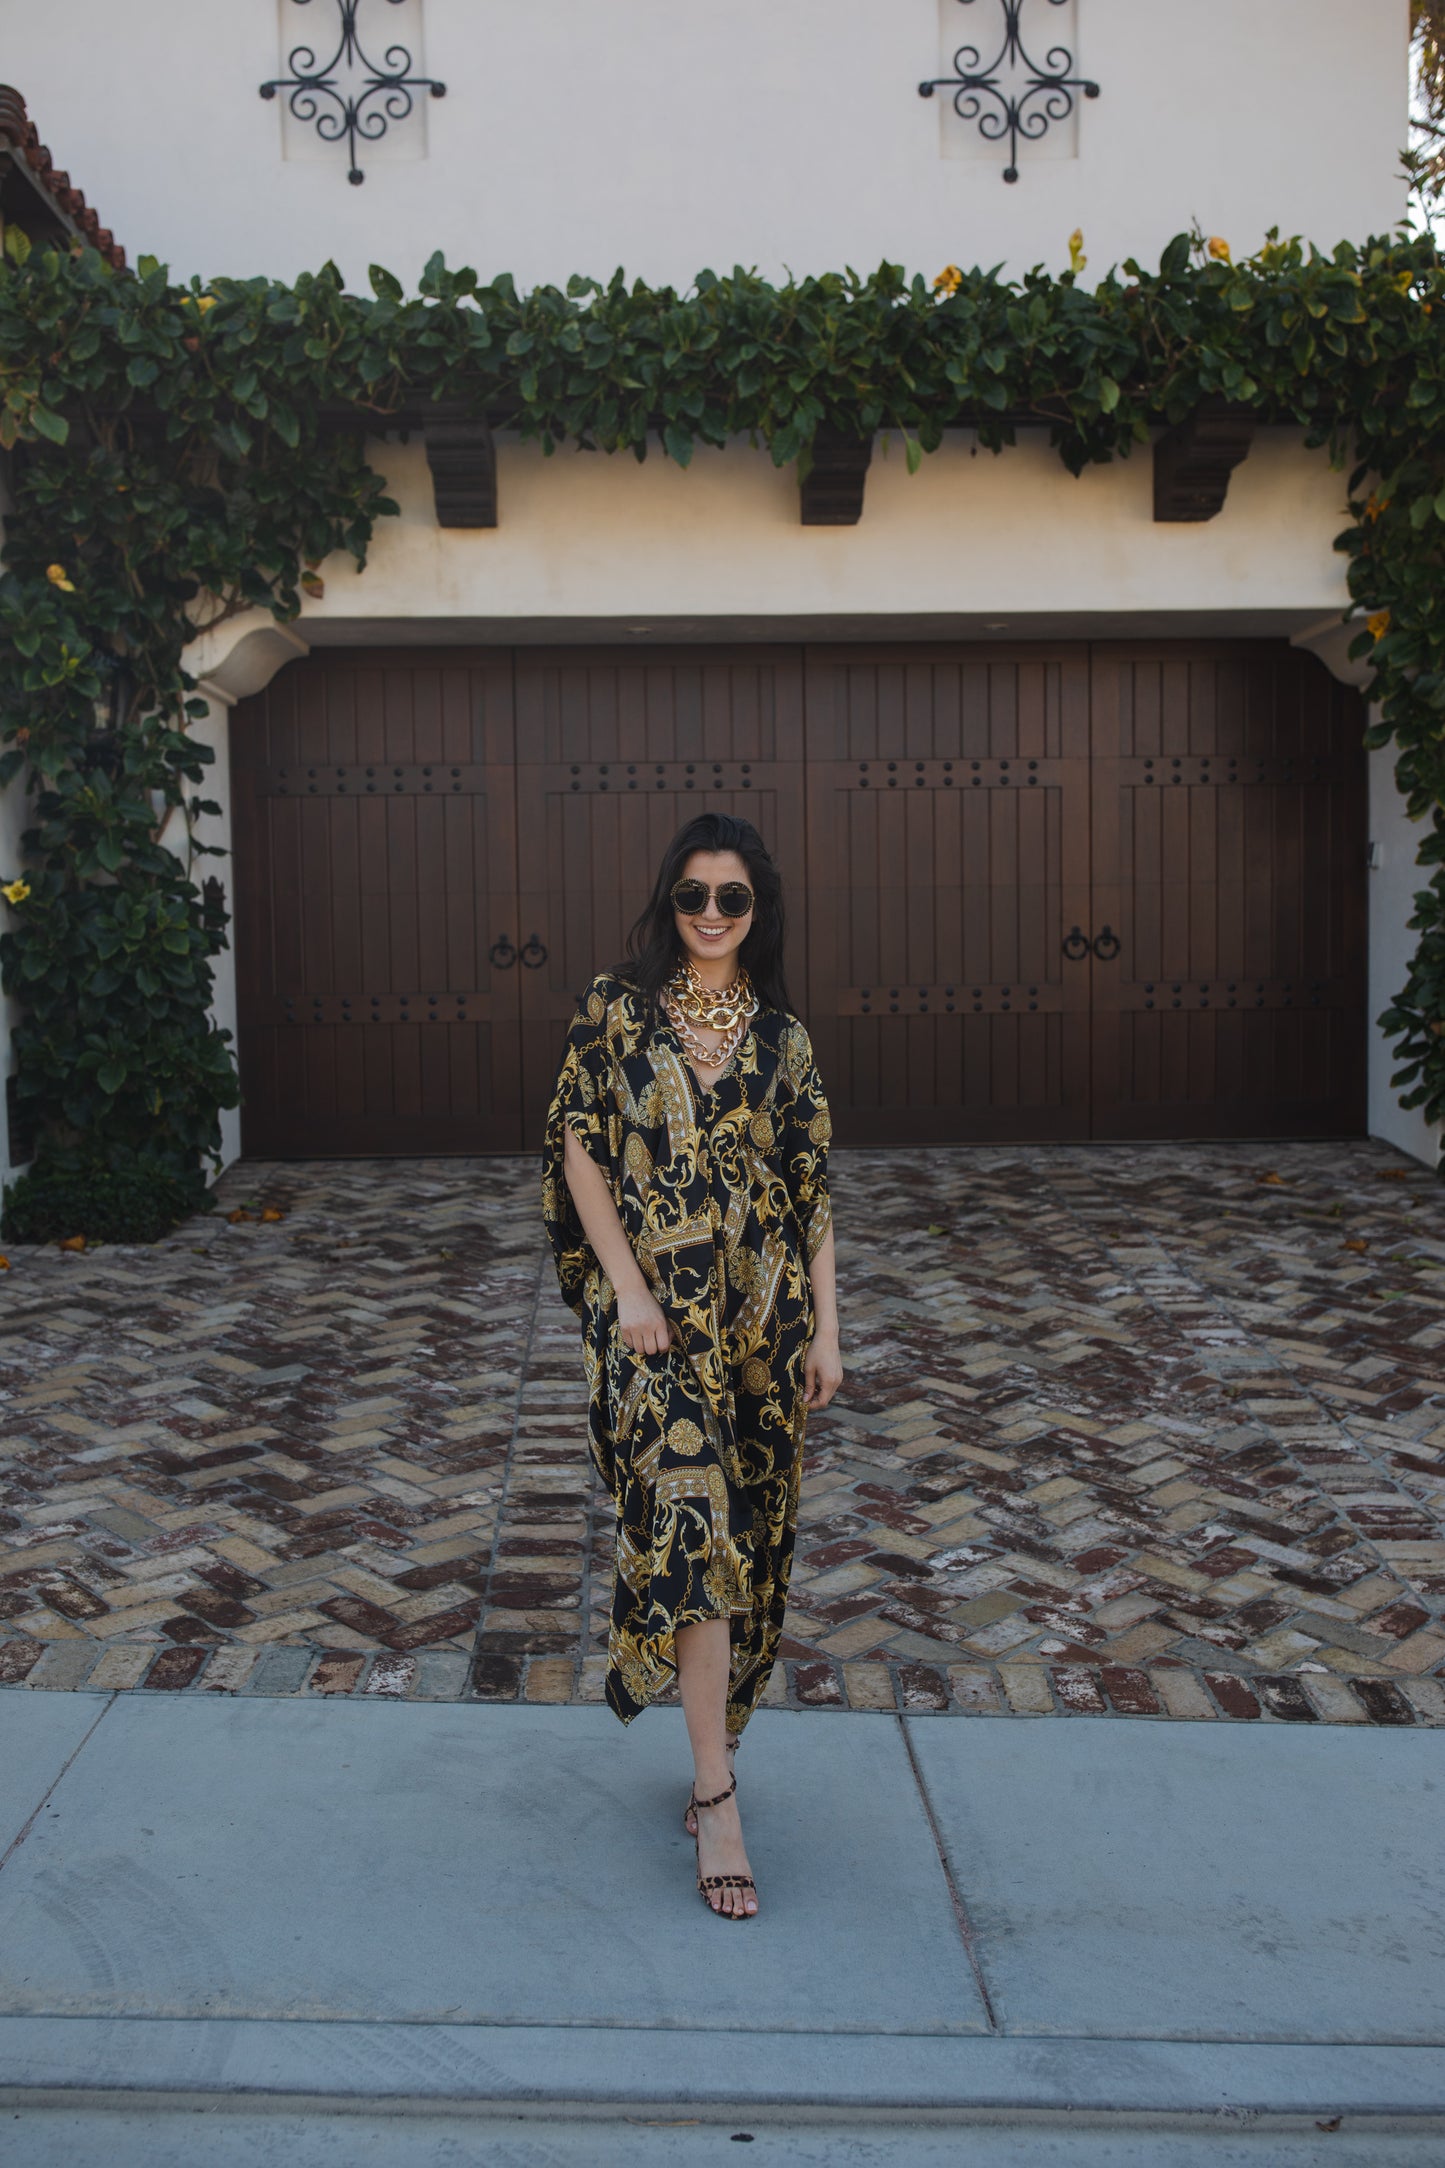 Opaque black caftan dress featuring yellow gold ornamental filigree patterned design. Featuring a deep v-neckline, short batwing sleeves, and an ankle-length hem. This caftan is a voluminous garment that gives a flowy silhouette that drapes beautifully on all shapes.